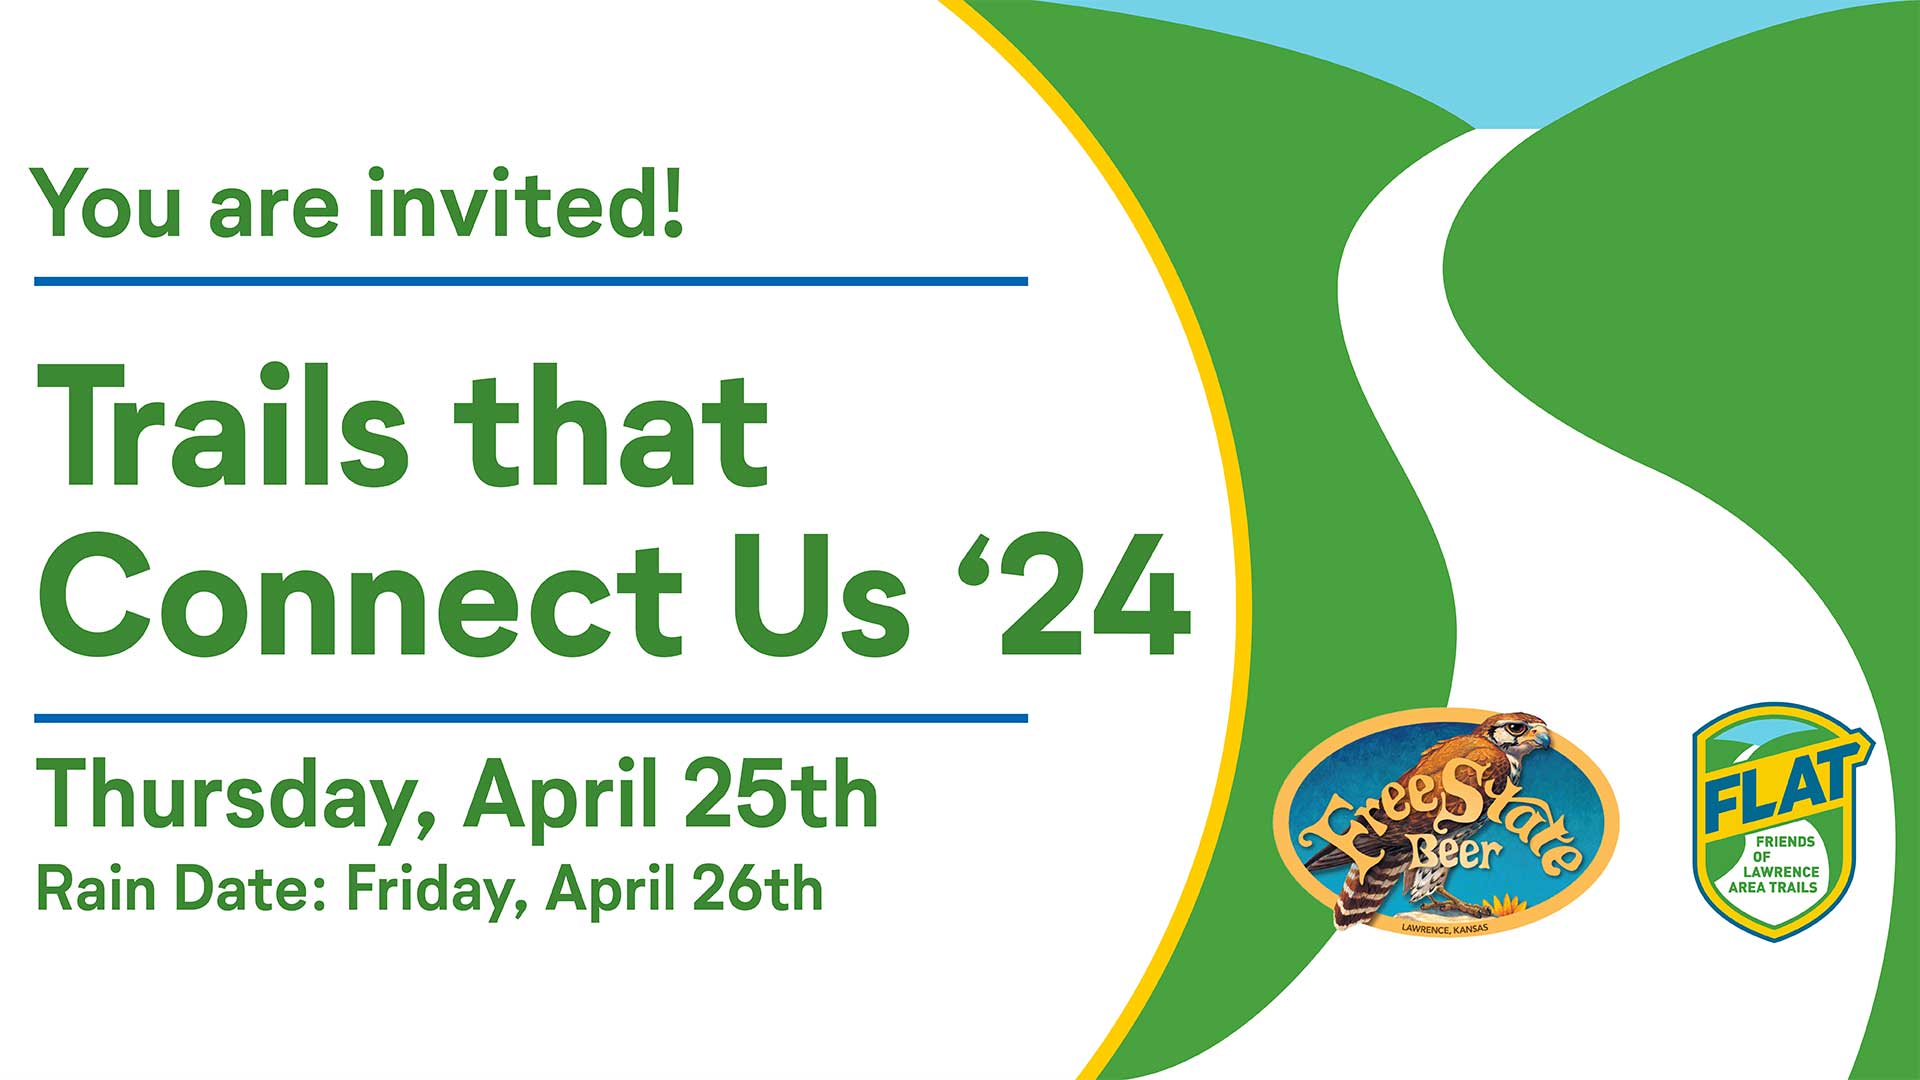 You are invited! Trails that Connect Us '24